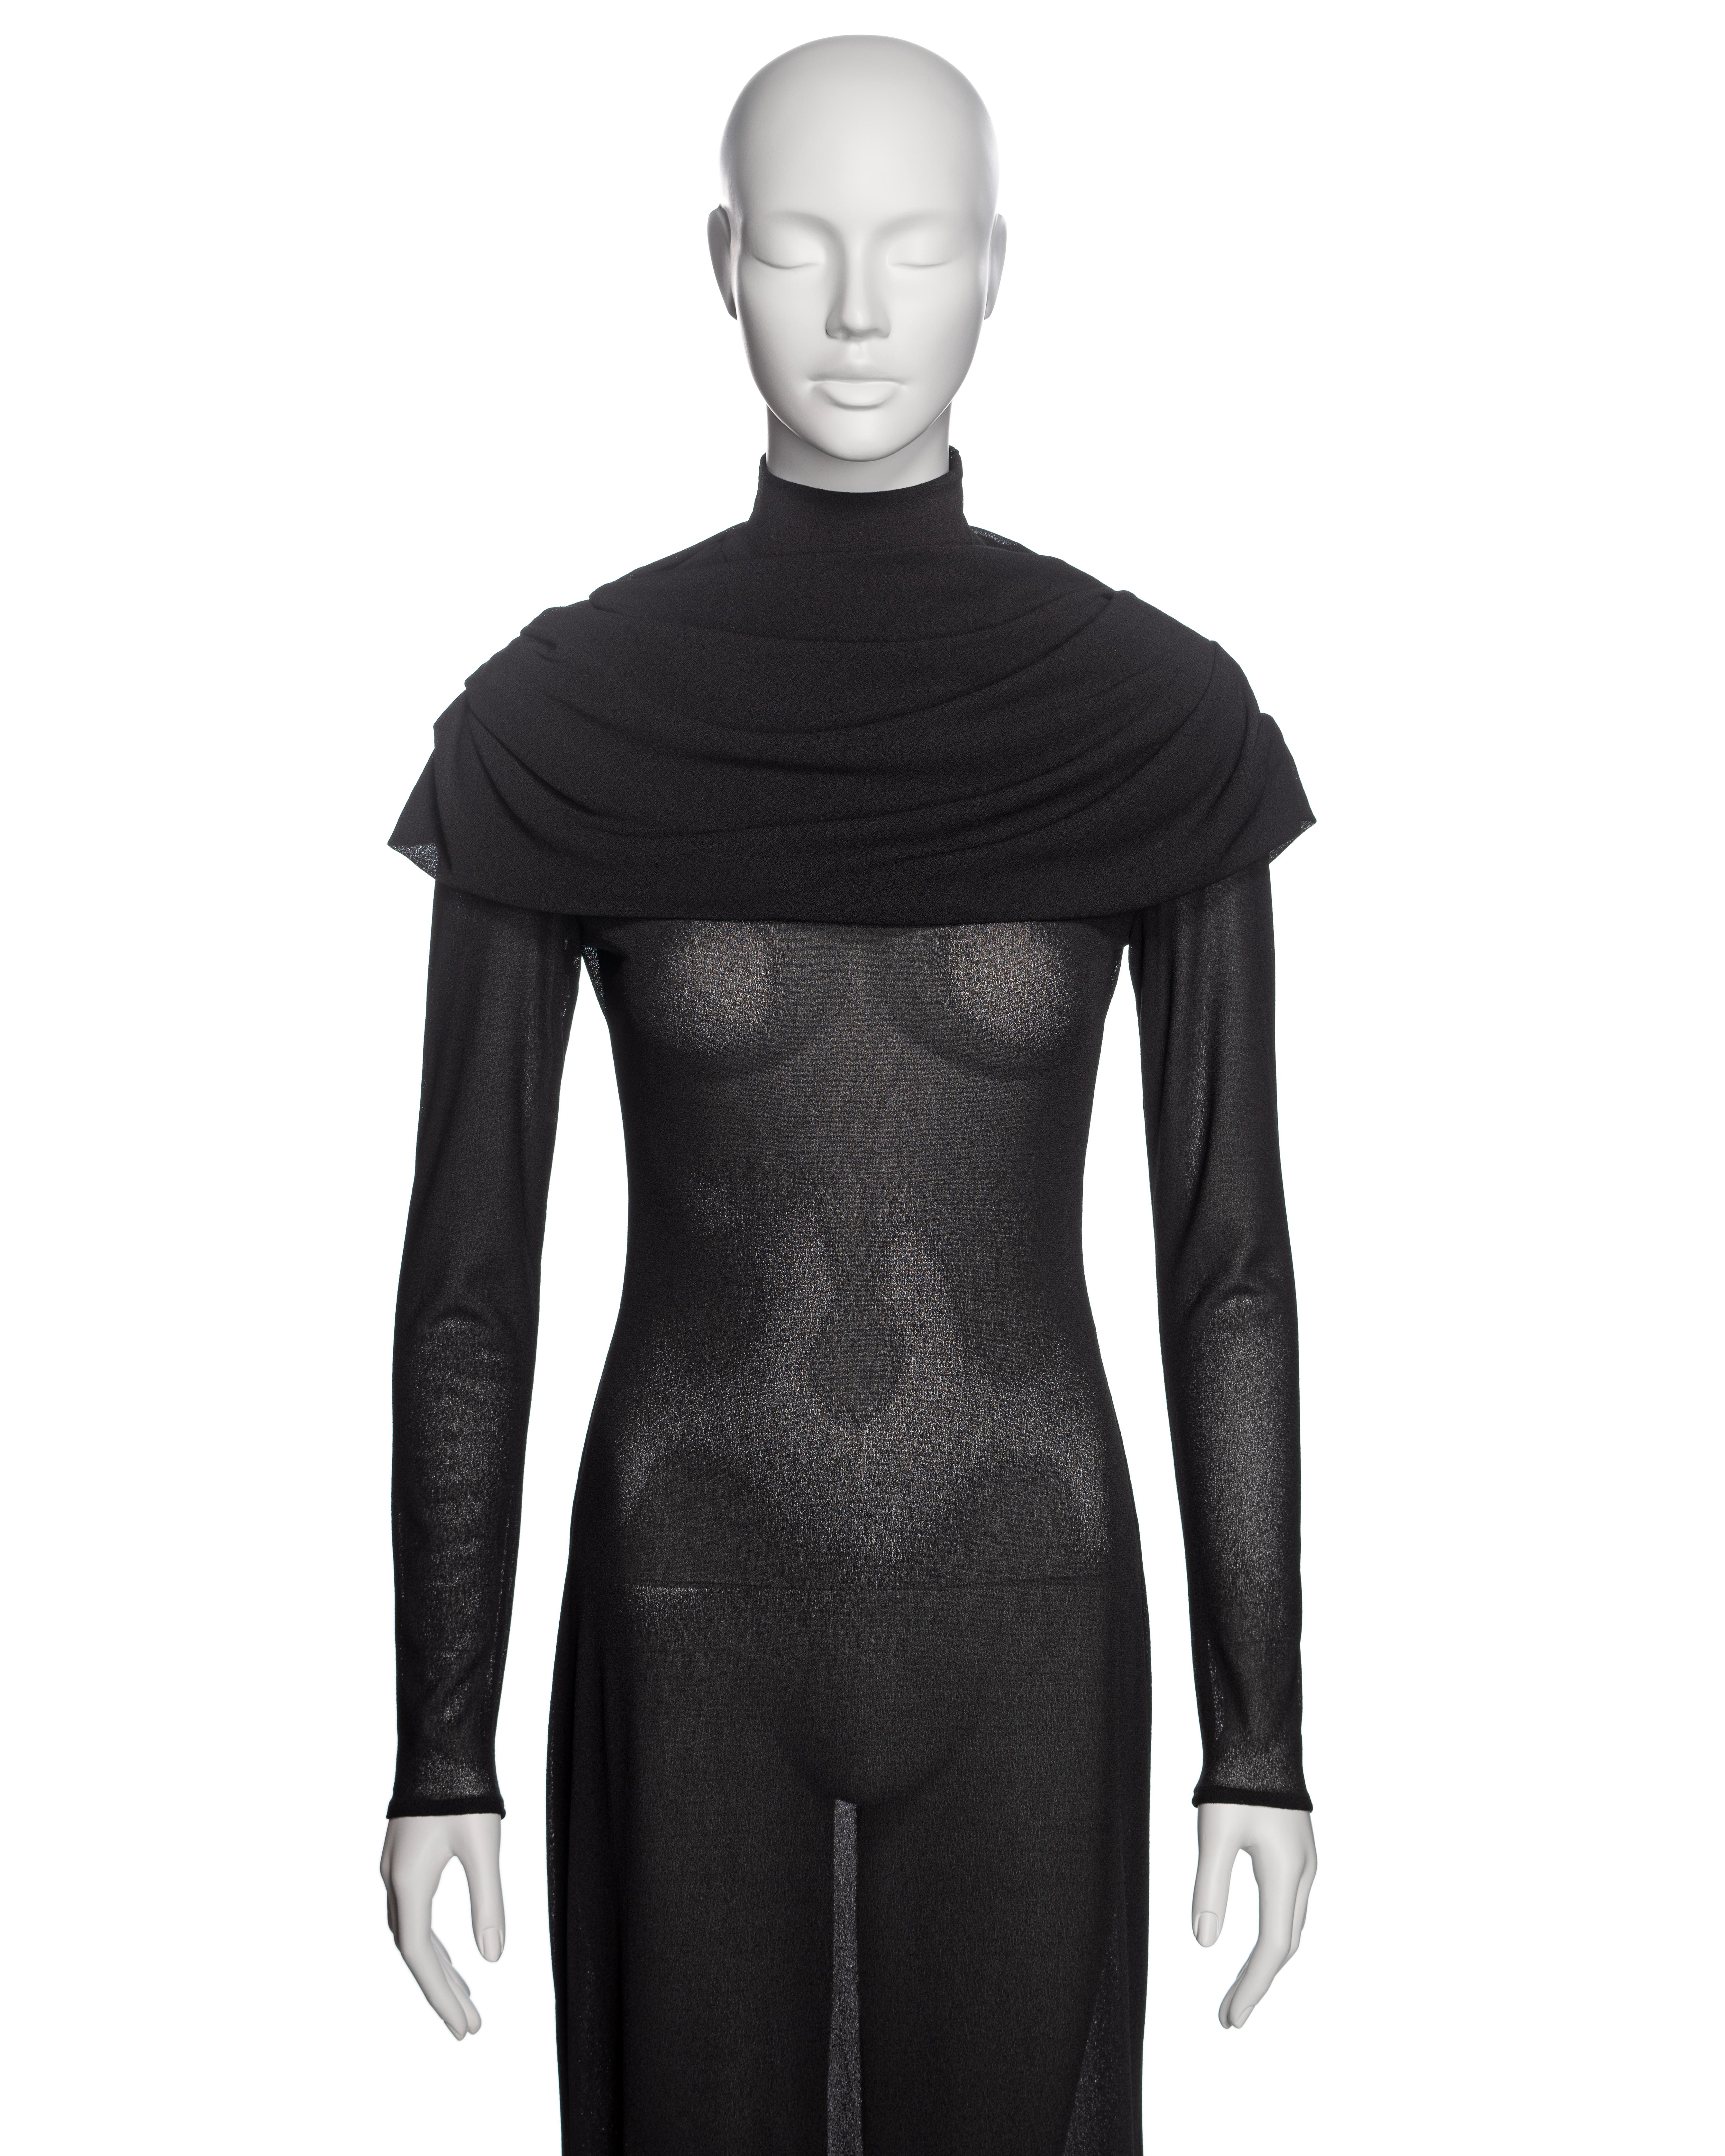 Alexander McQueen Black Mock Neck Evening Dress with Draped Cowl, 'Joan' FW 1998 In Excellent Condition For Sale In London, GB